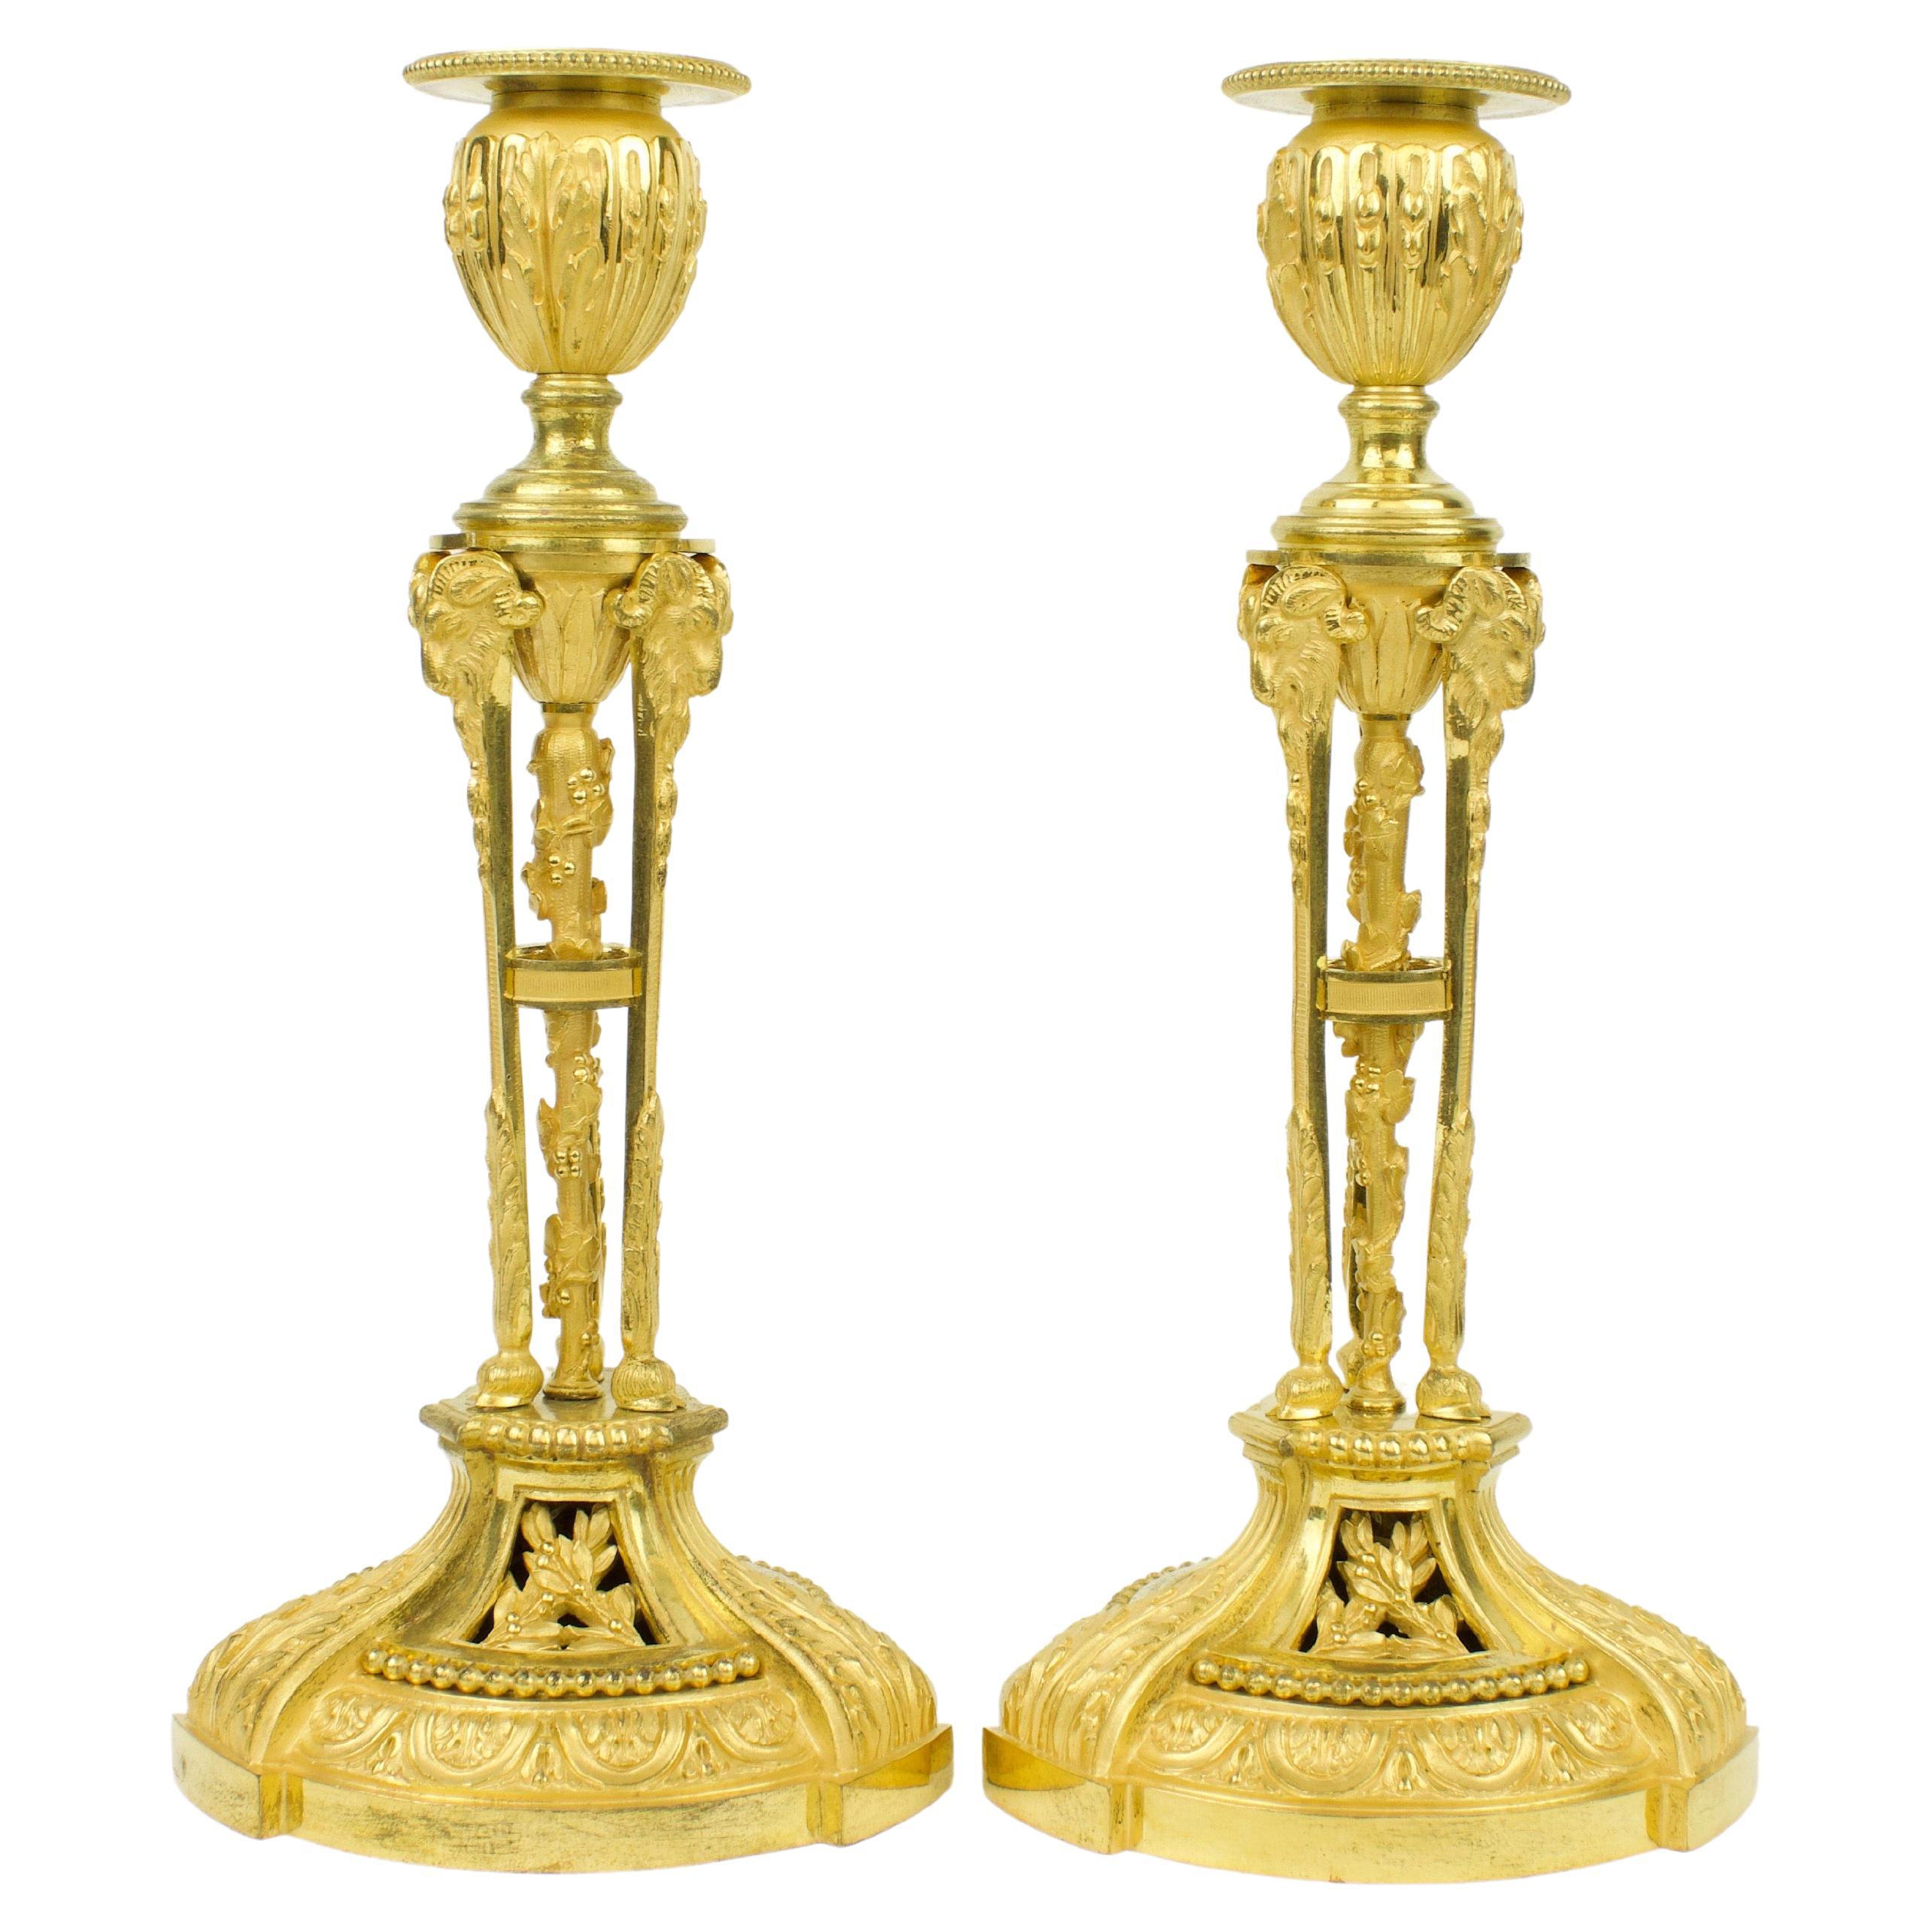 Pair of Early 19th Century Louis XVI Gilt Bronze Candlesticks after Martincourt For Sale